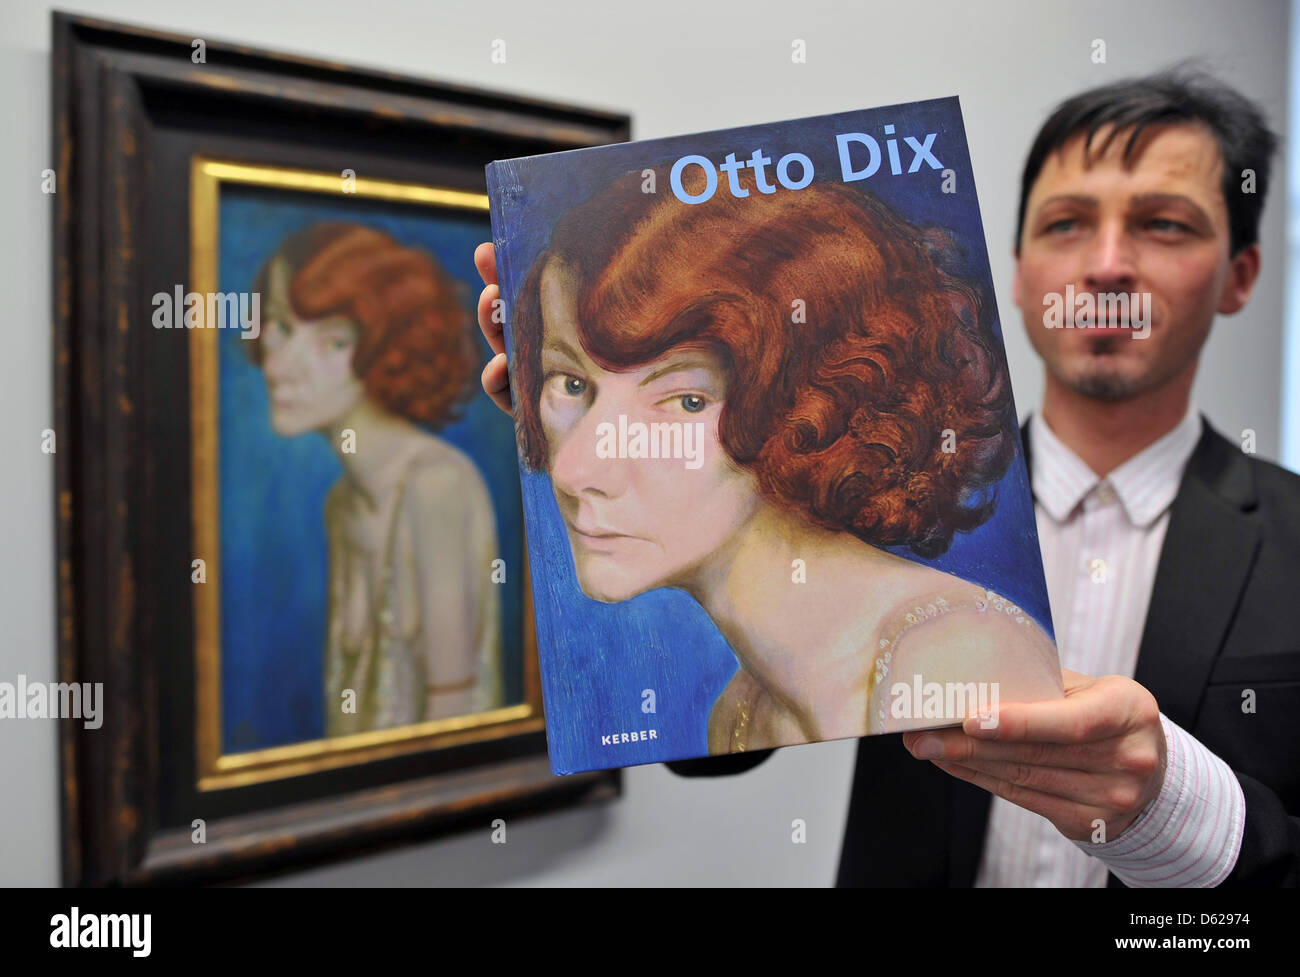 The curator of the Gunzenhauser Collection at the Kunstsammlungen Chemnitz, Thomas Bauer-Friedrich, presents the new catalogue of the entire Otto Dix collection in Chemnitz, Germany, 16 May 2012. The cover is 'Red-haired Woman' from 1931. The museum has collected its entire Dix collection into a new catalogue. The museum has one of the most important and largest Otto Dix collection Stock Photo